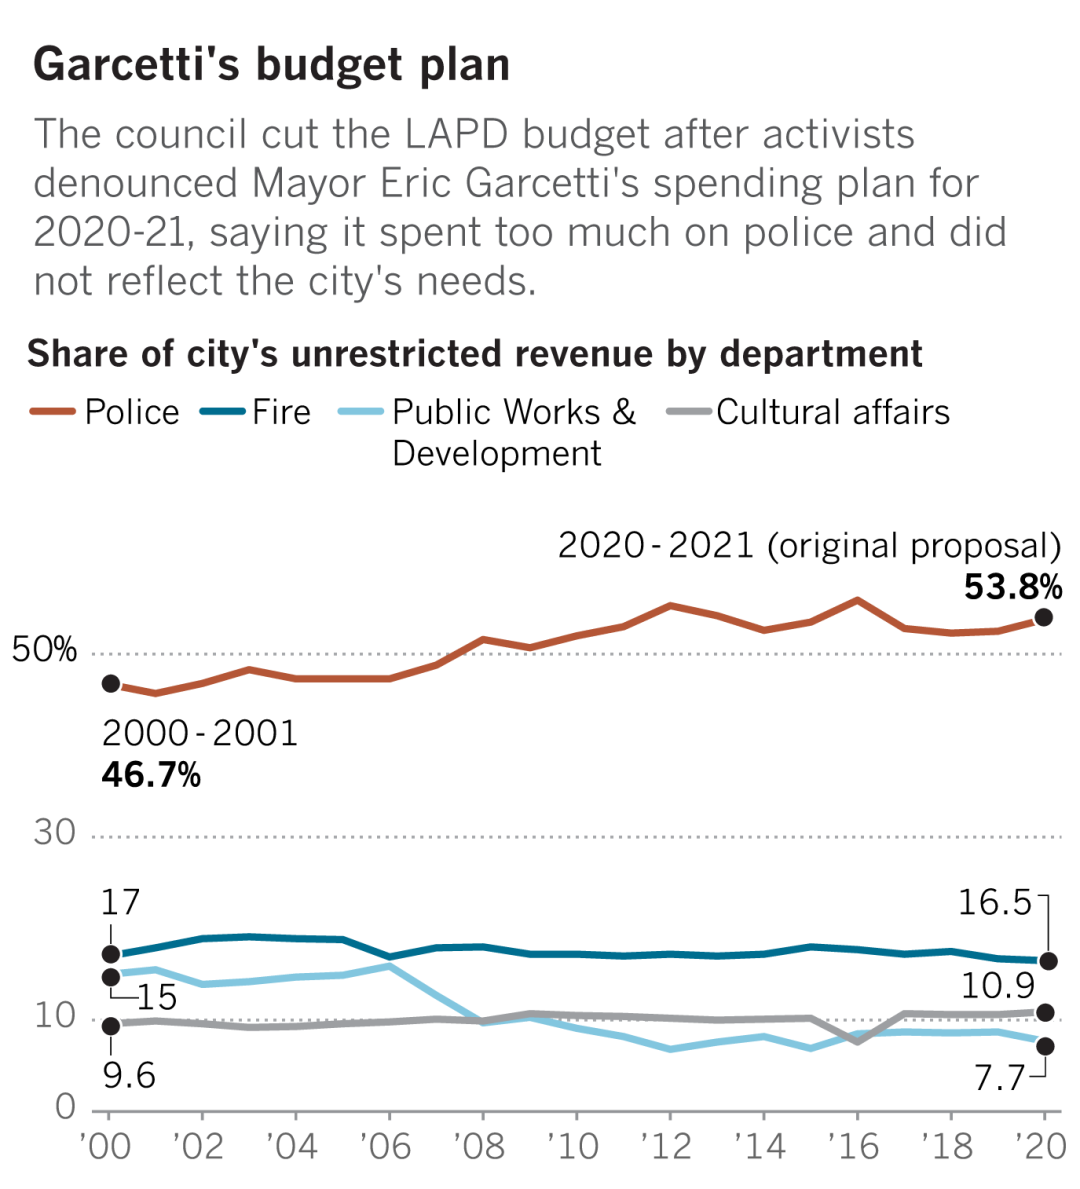 The council cut the LAPD budget after activists denounced Mayor Eric Garcetti's spending plan for 2020-21.